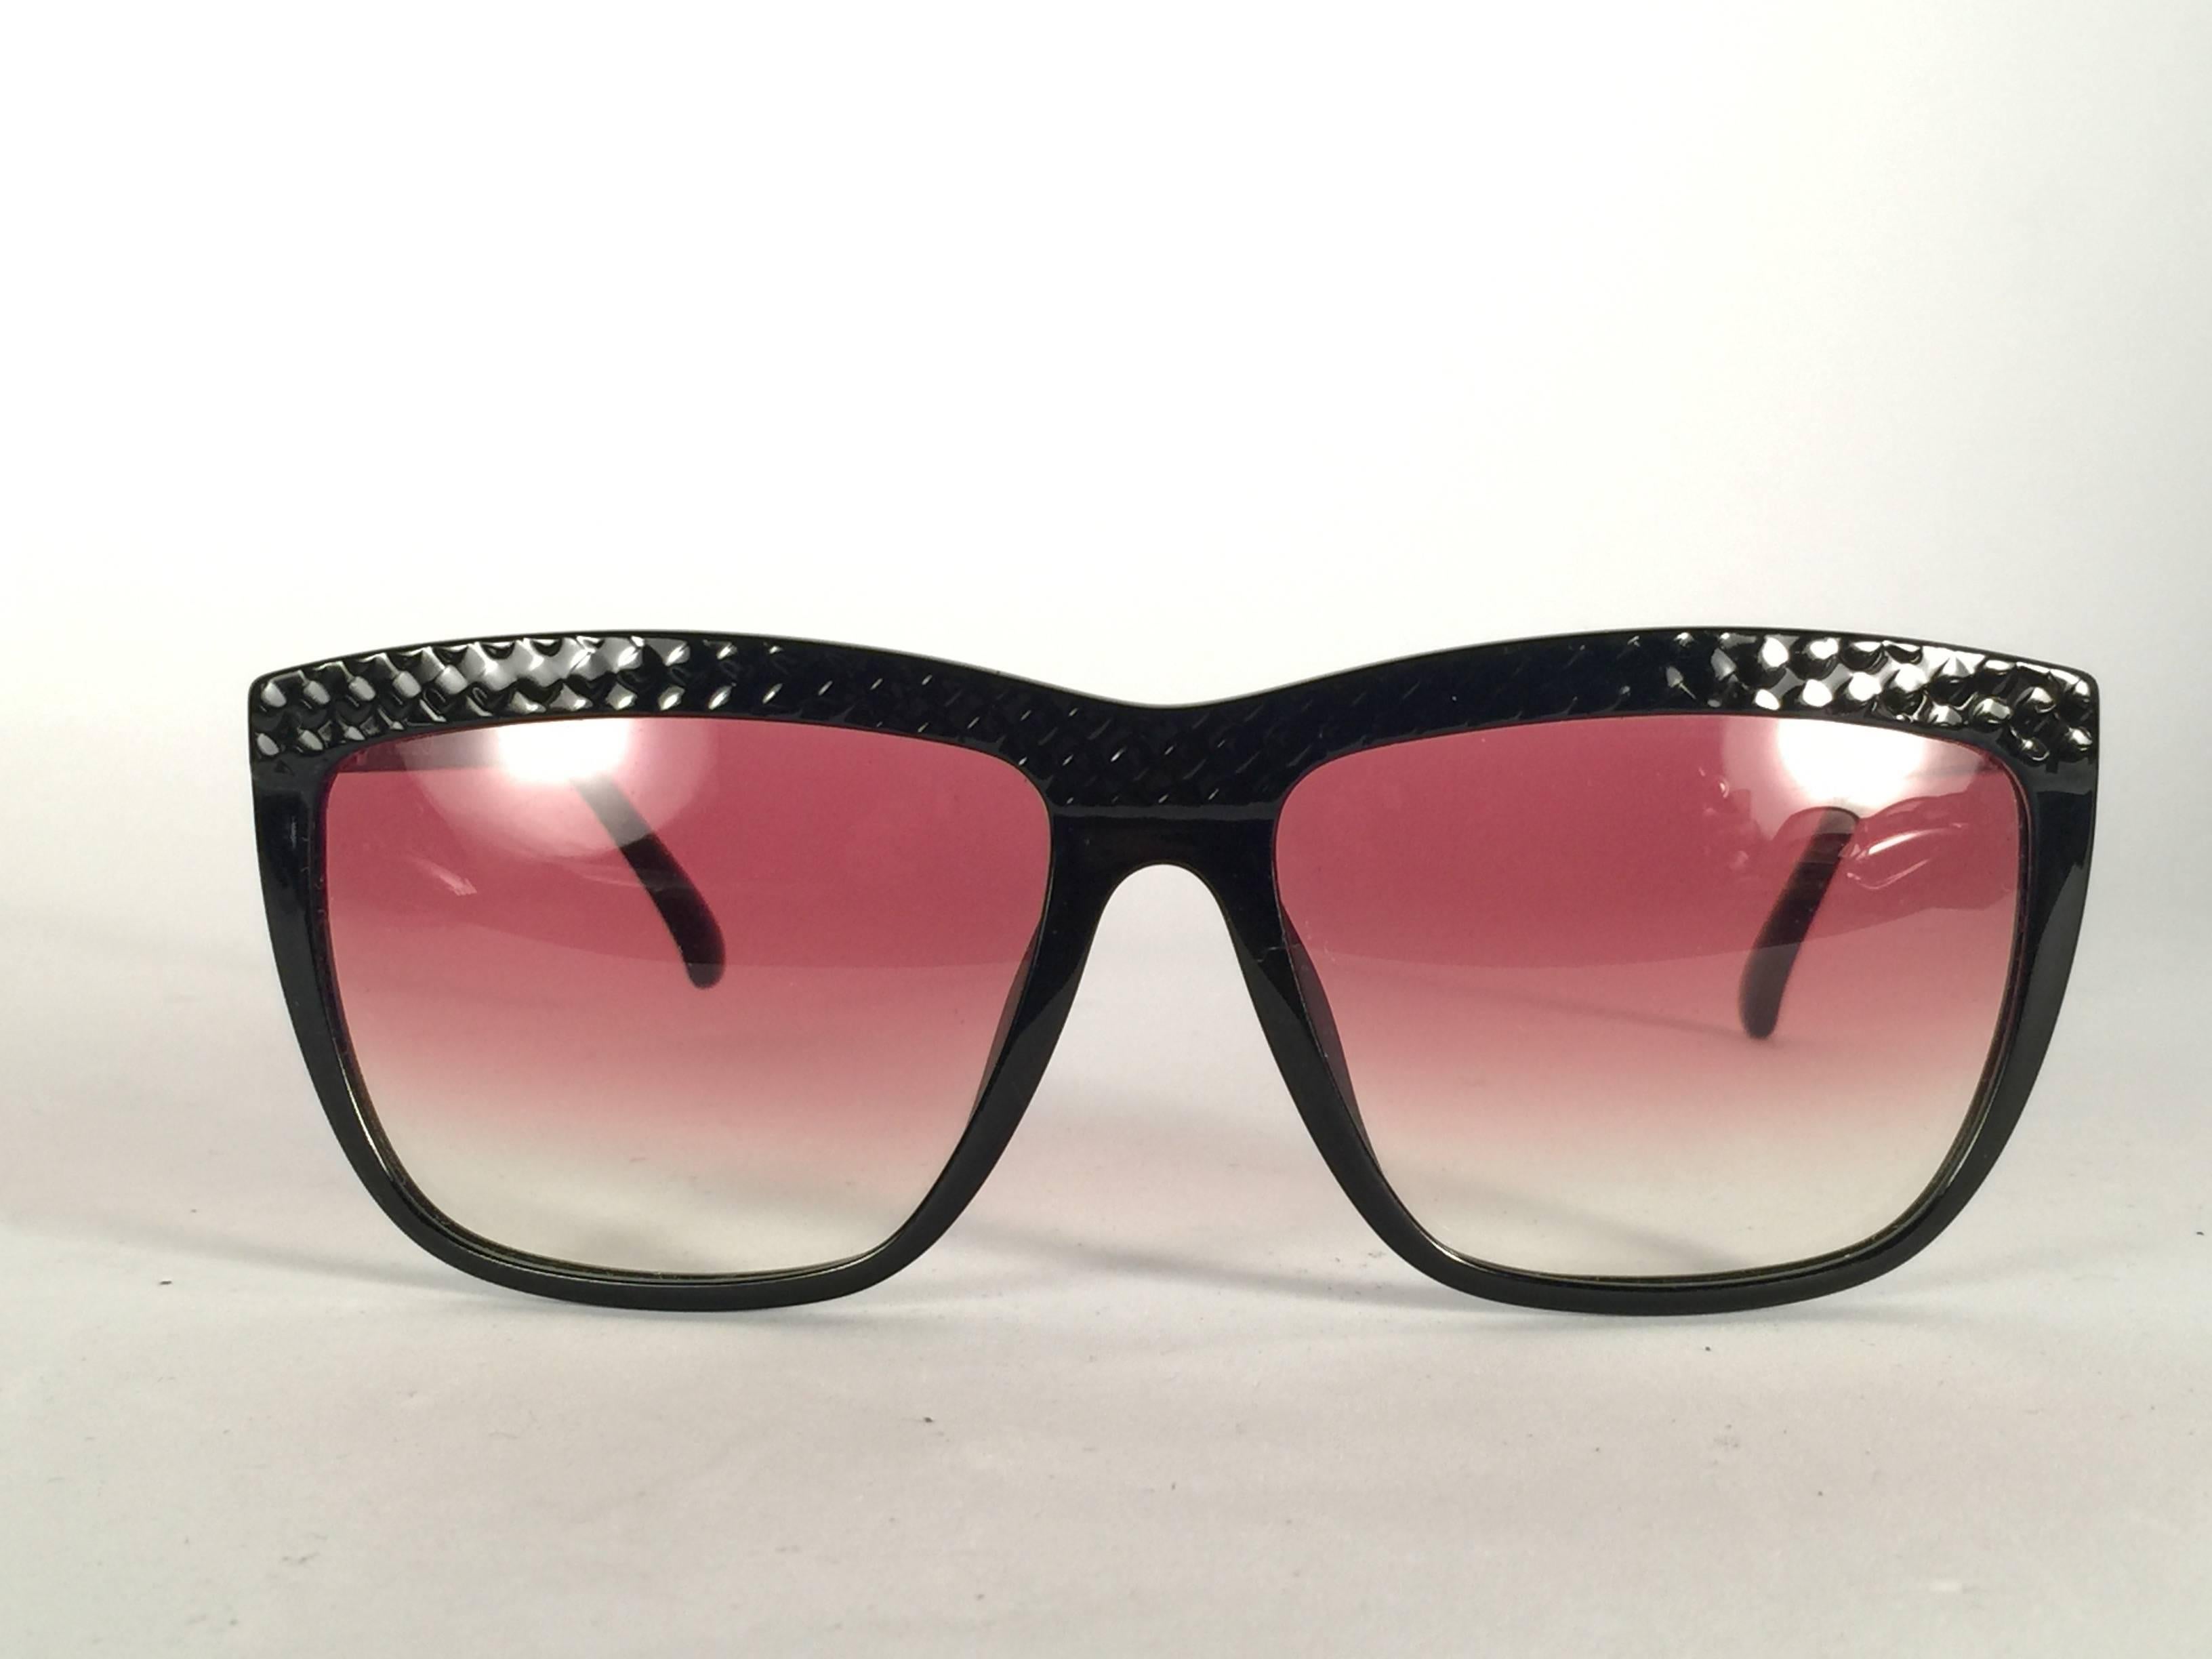 Mint Vintage Christian Dior 2399 Black frame with spotless light gradient lenses.   Made in Germany.  Produced and design in 1970's.  Comes with its original silver Christian Dior Lunettes sleeve.